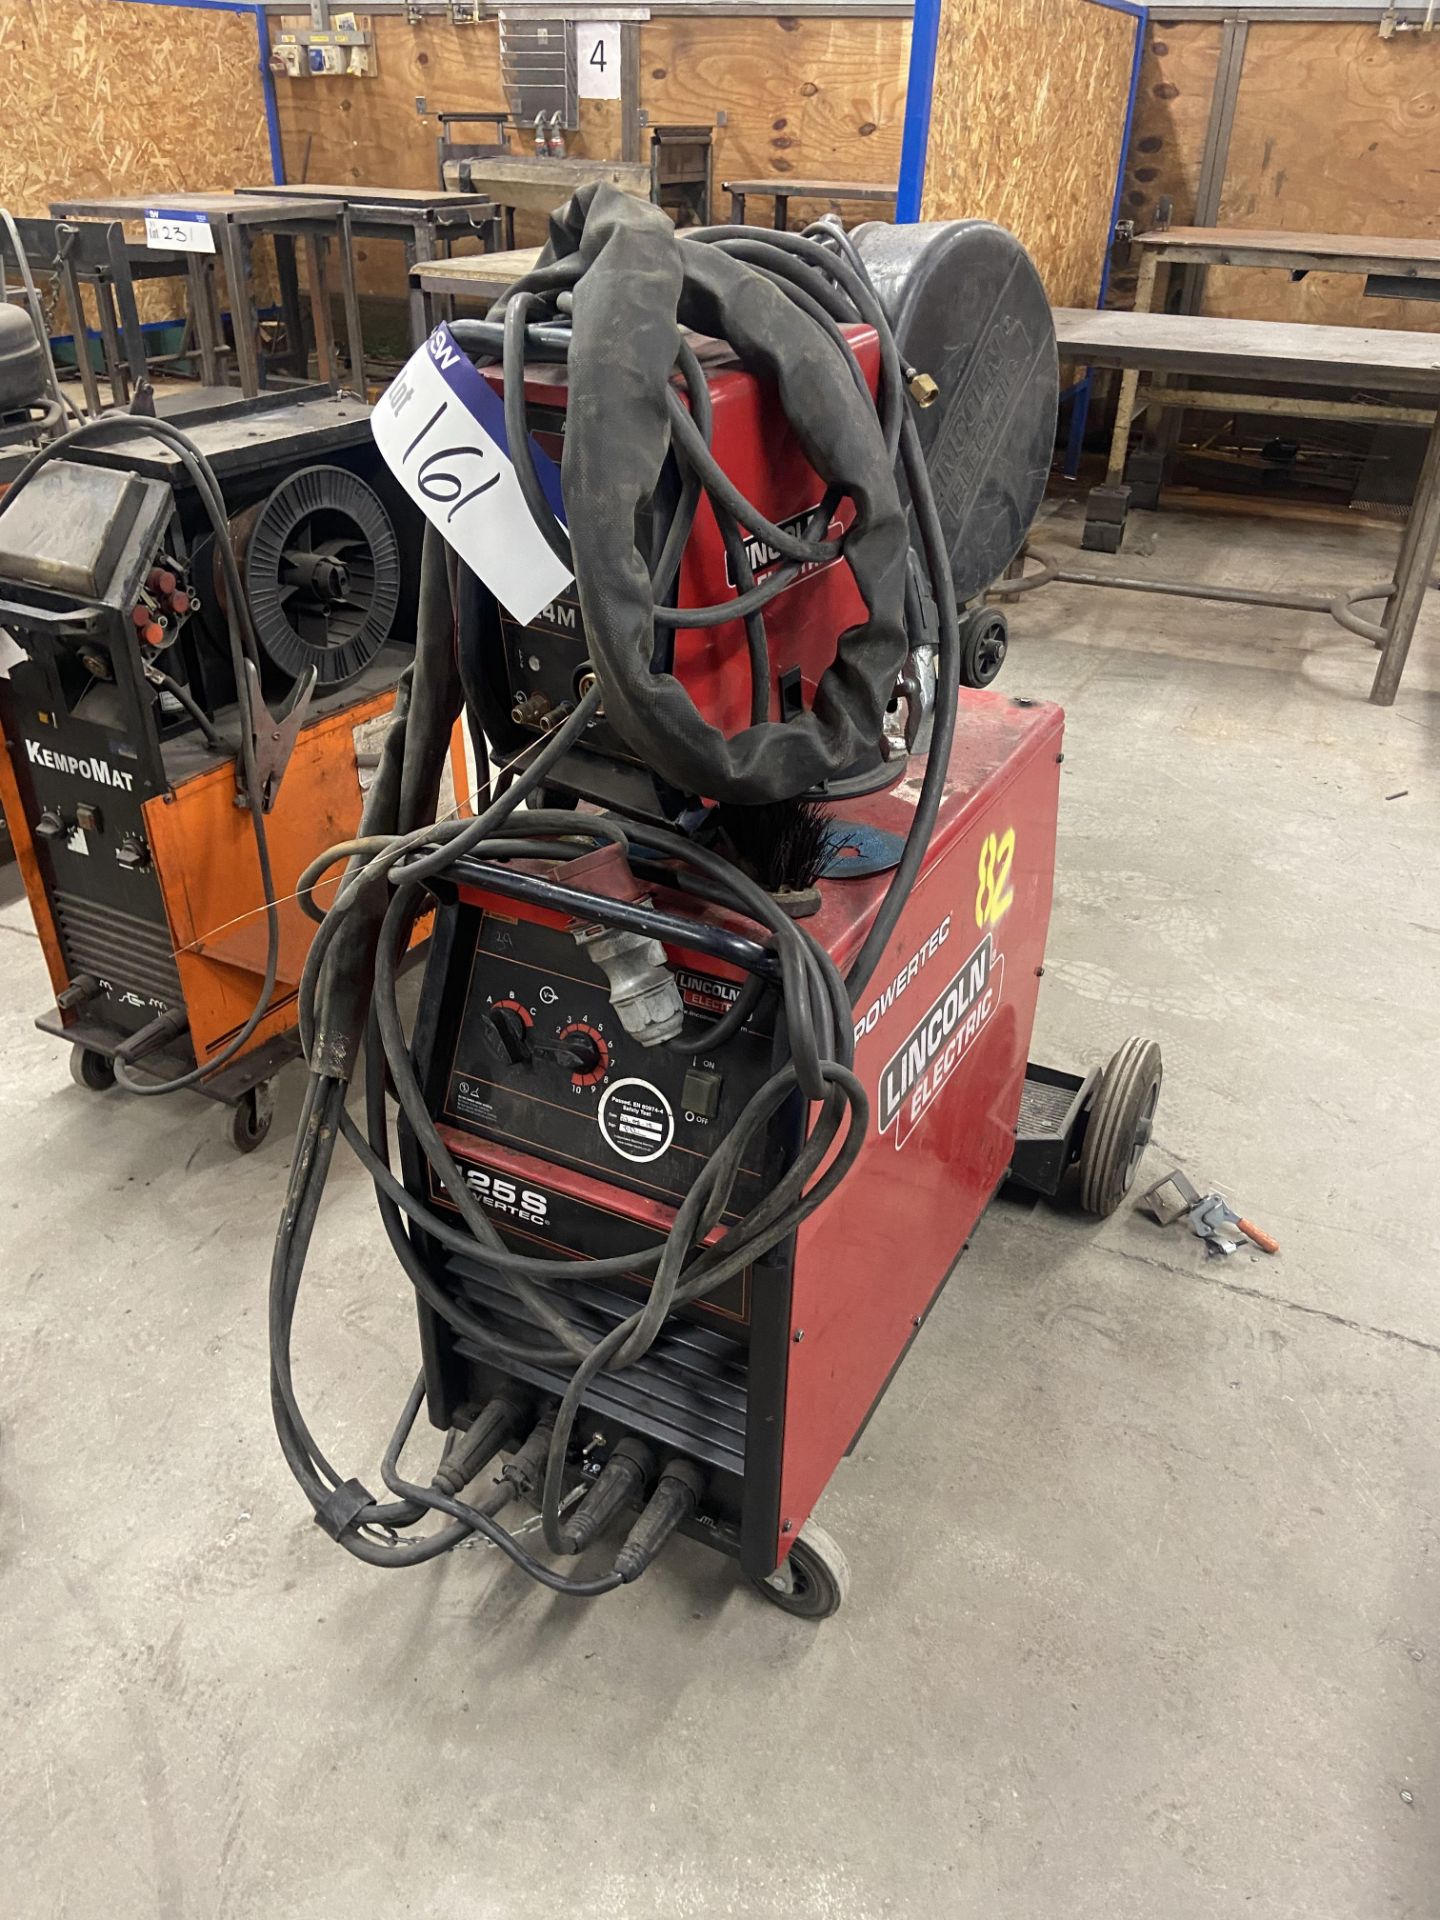 Lincoln Electric 425S POWERTEC MIG WELDING SET, serial no. P1180508917 Please read the following